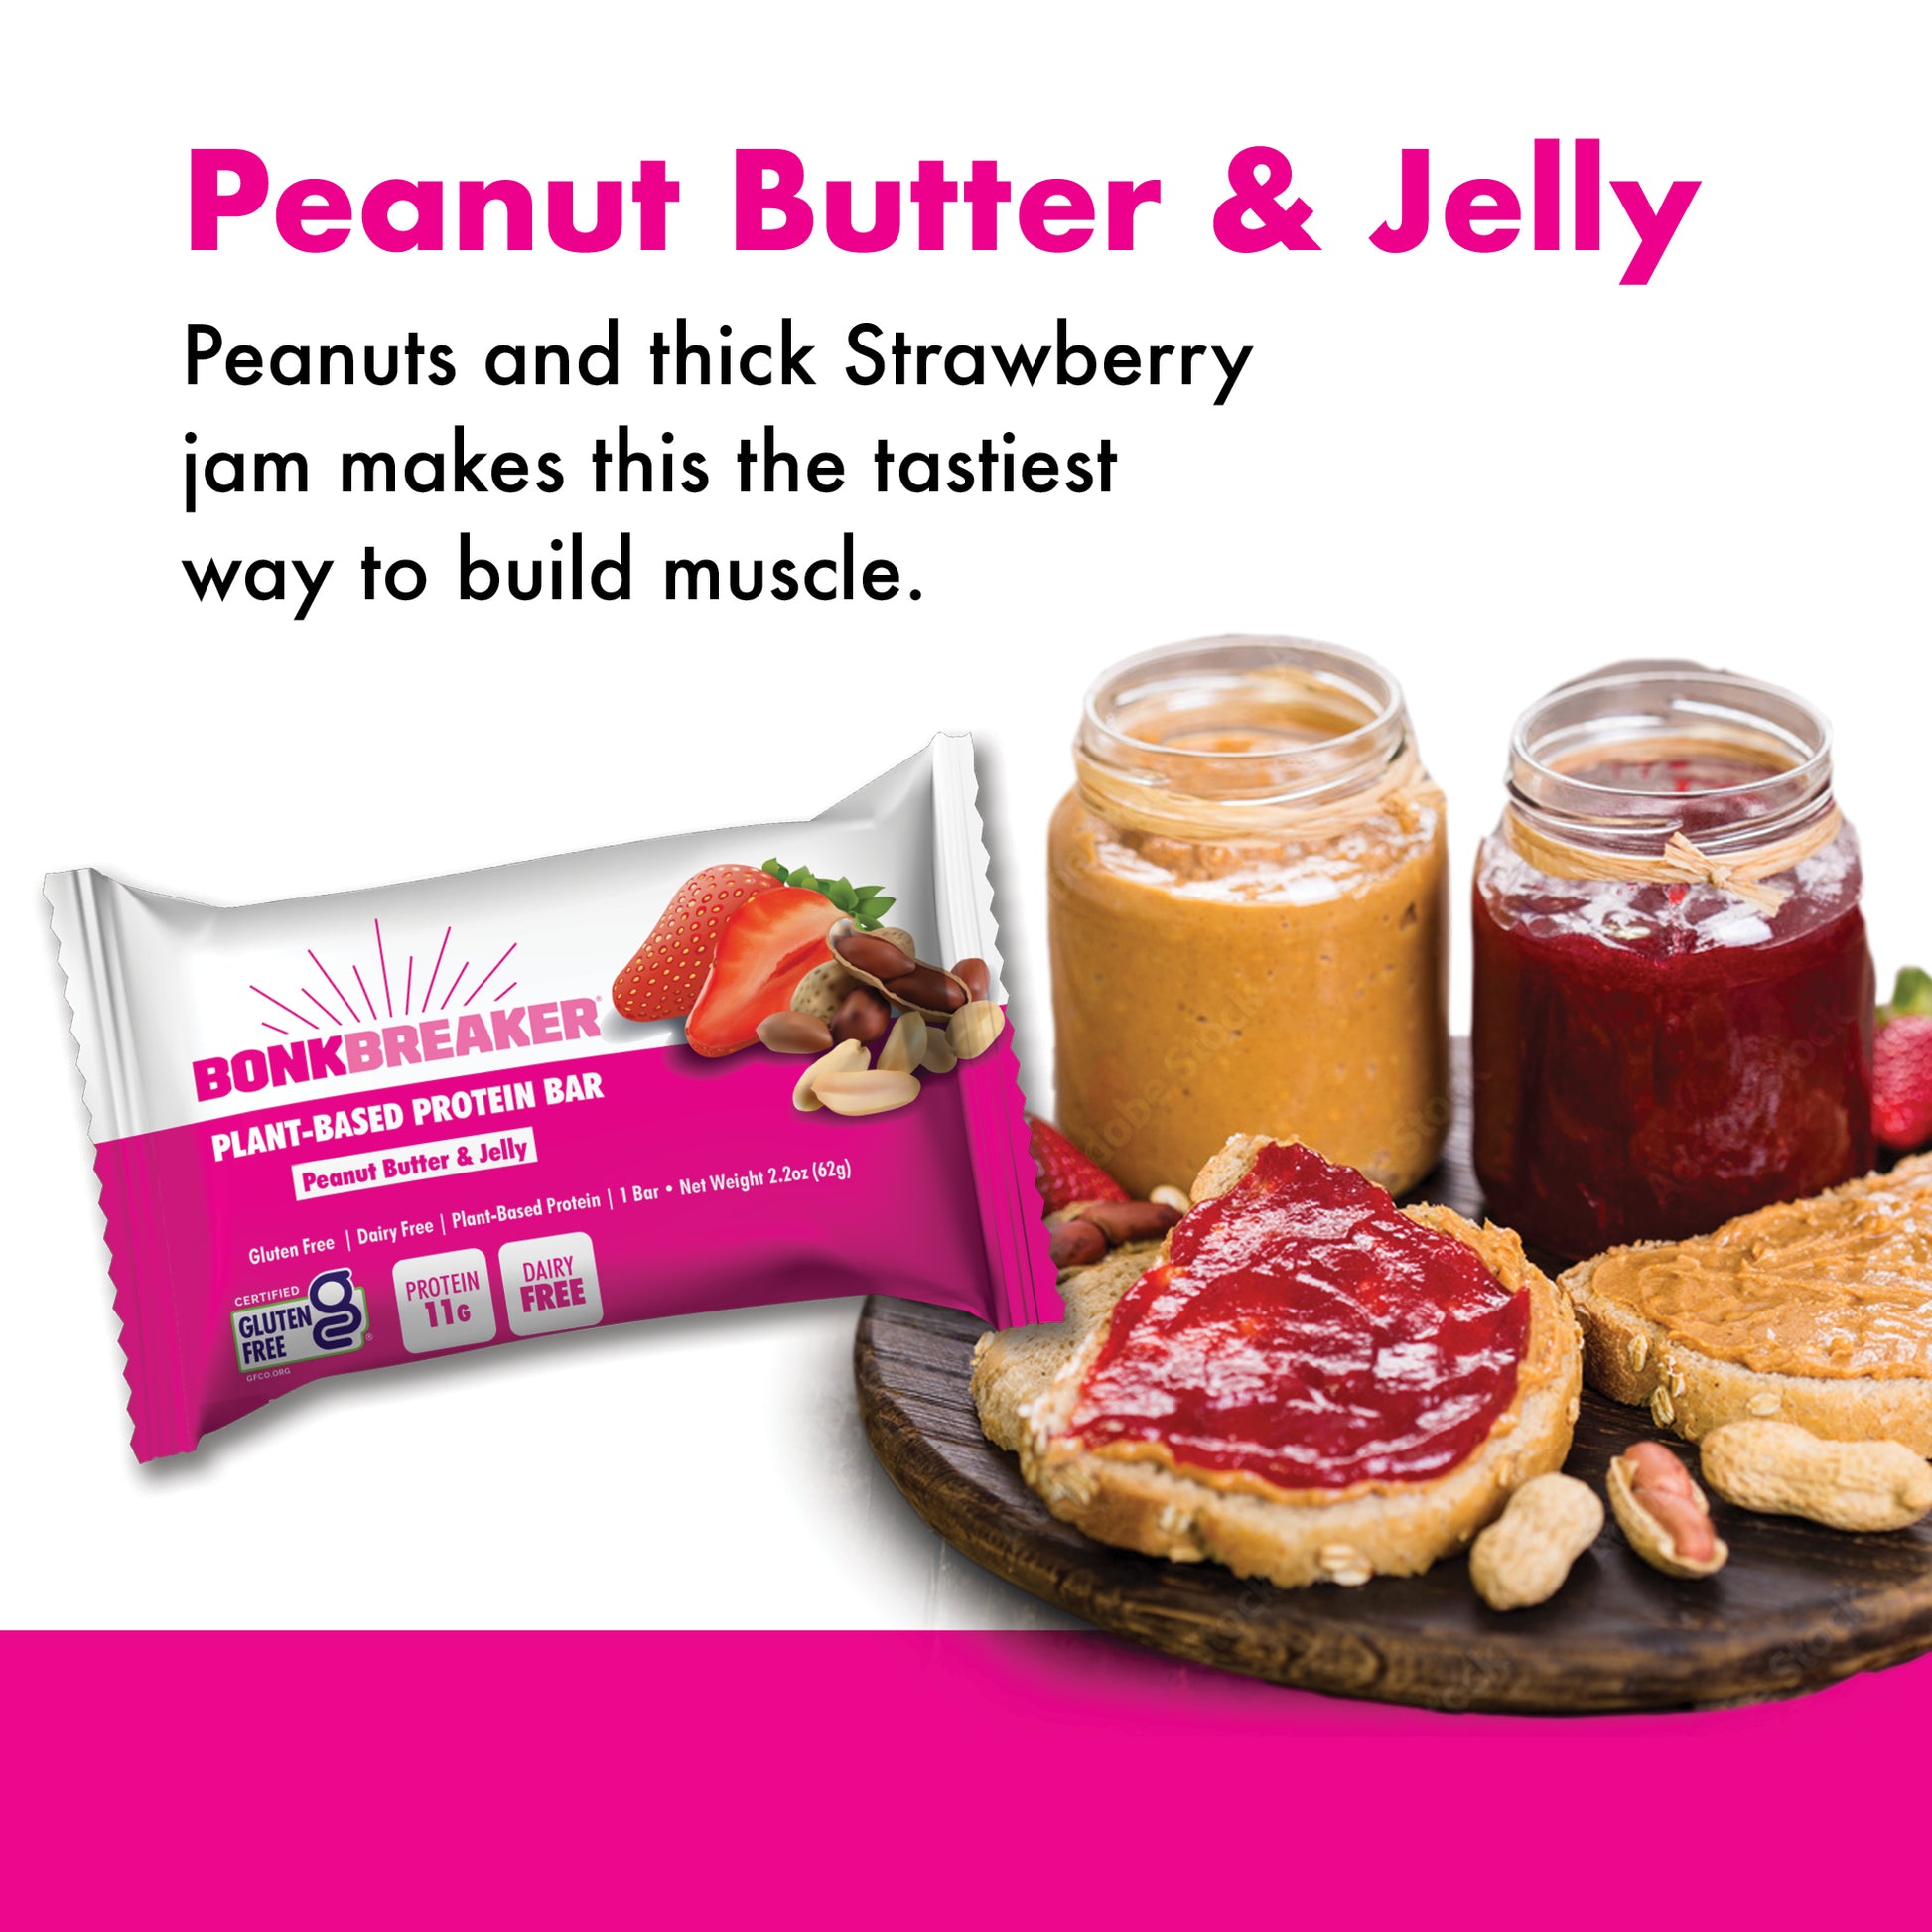 Peanut Butter & Jelly - Peanuts and thick strawberry jan makes this the tastiest way to build muscle.